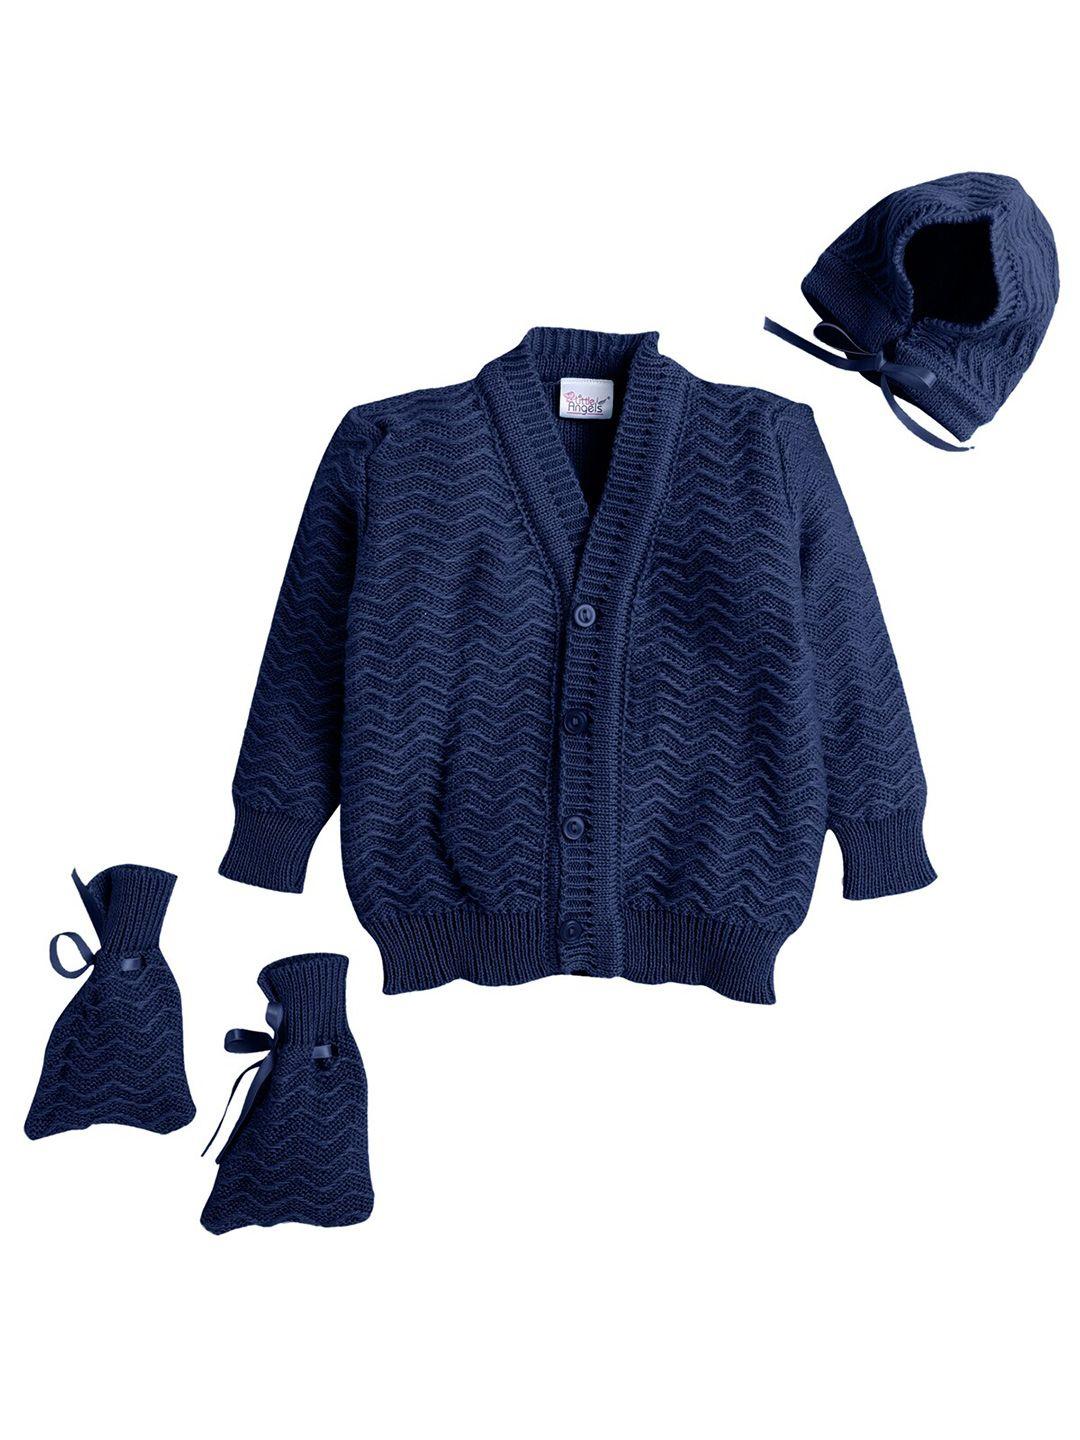 little-angels-kids-navy-blue-acrylic-ribbed-cardigan-set-with-cap-and-socks